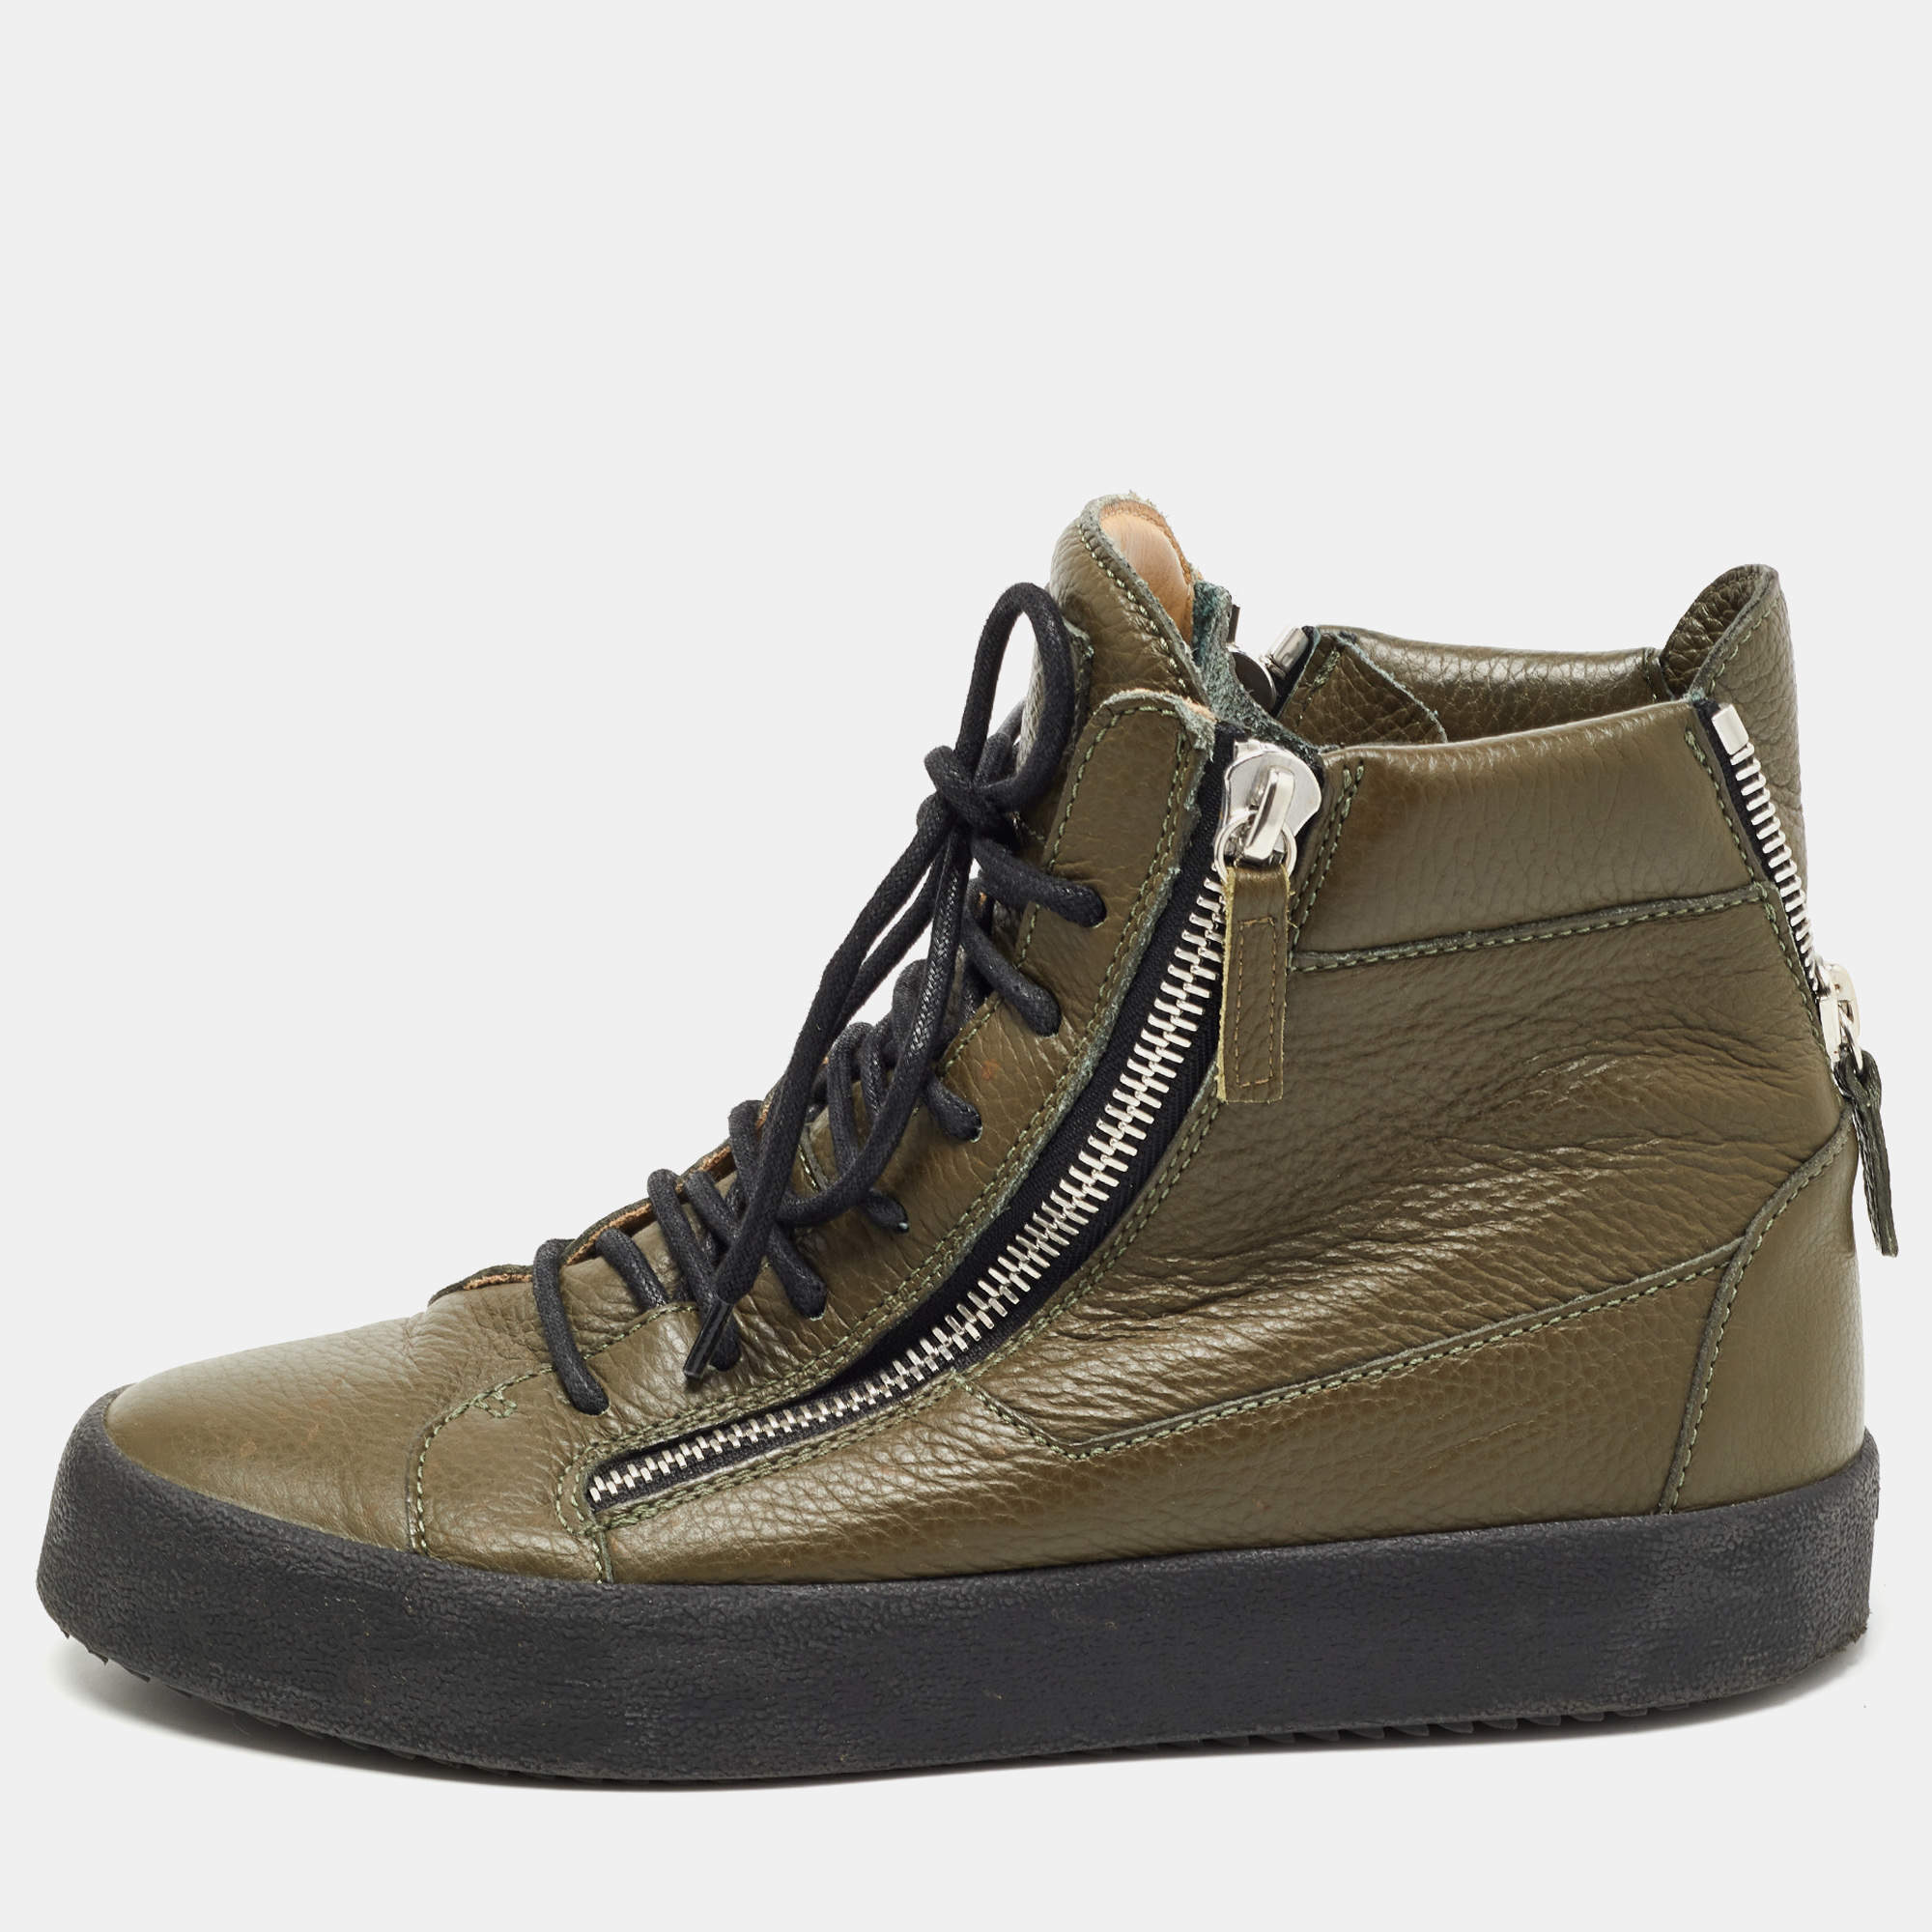 Giuseppe Zanotti Olive Green Leather Double Zip Sneakers Size 41.5  